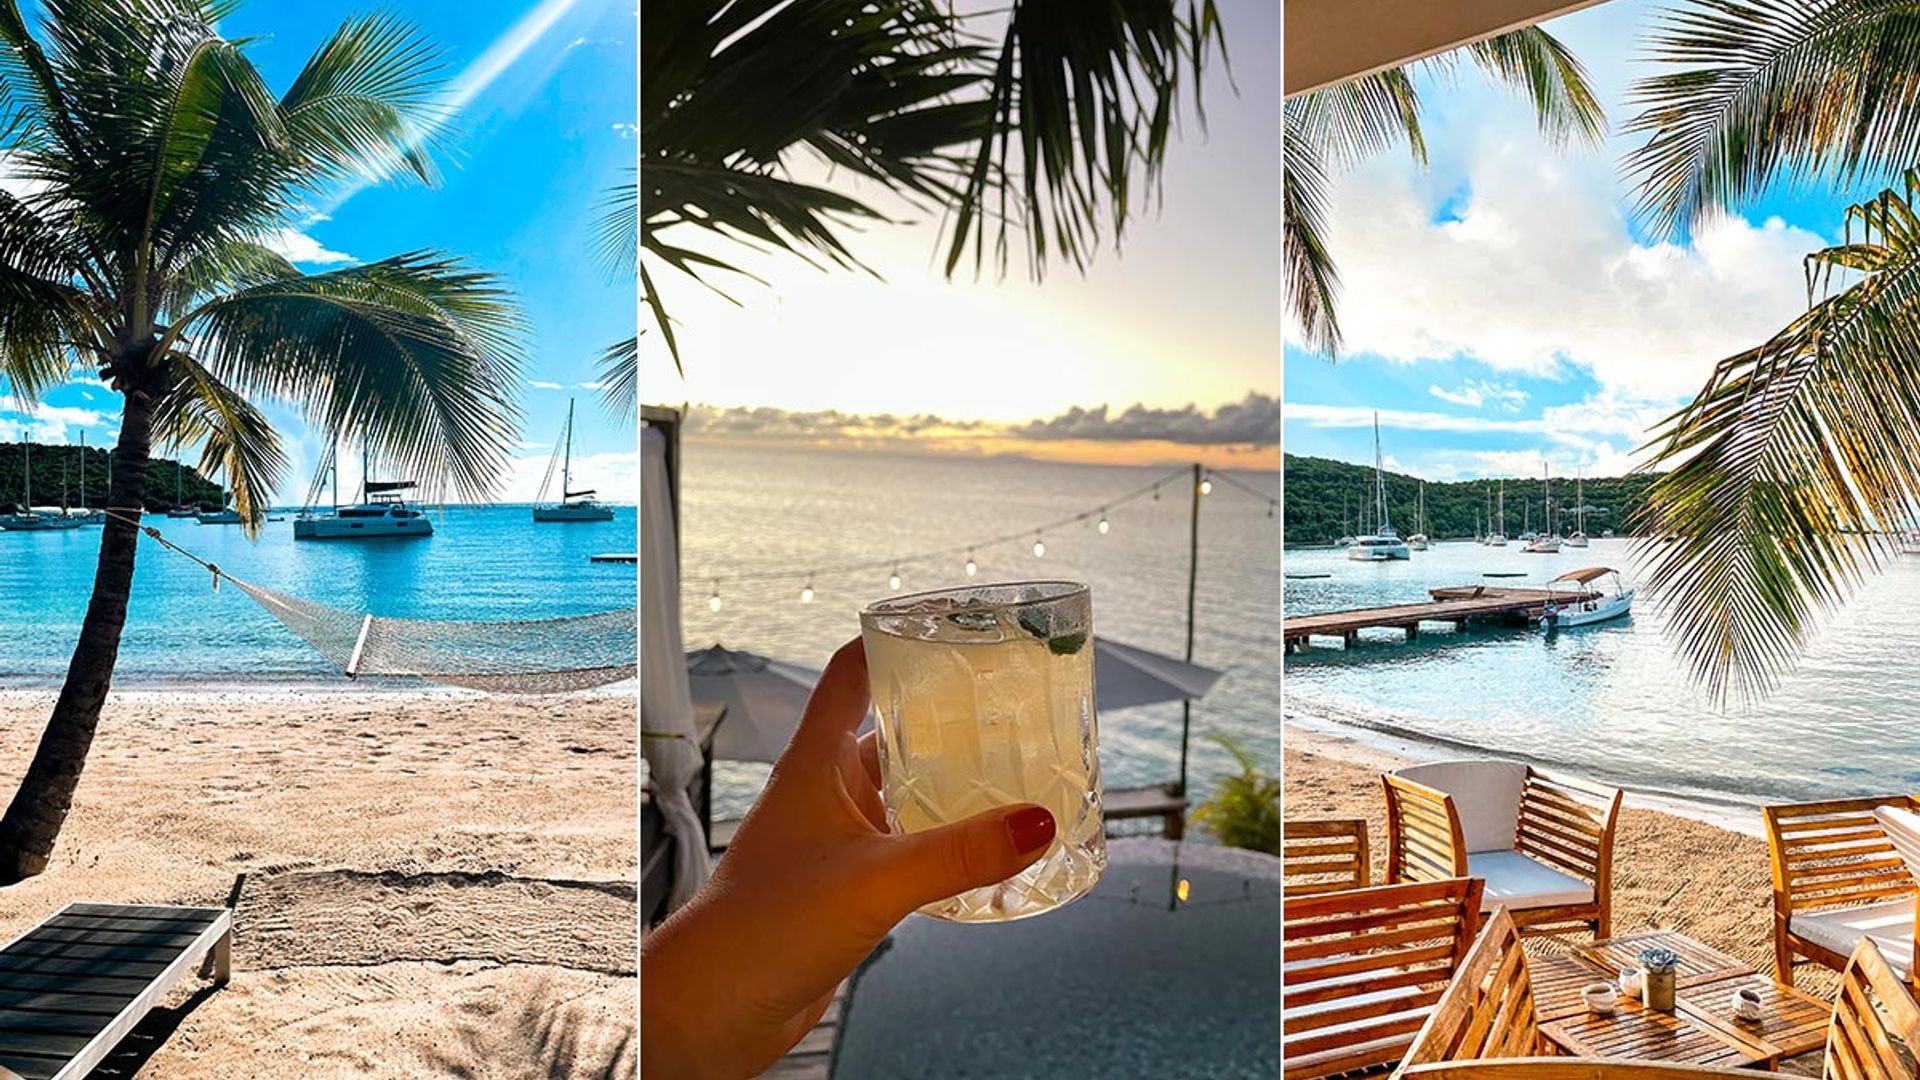 I swapped working from home in London to a sunny beach in Antigua and it was easier than I thought